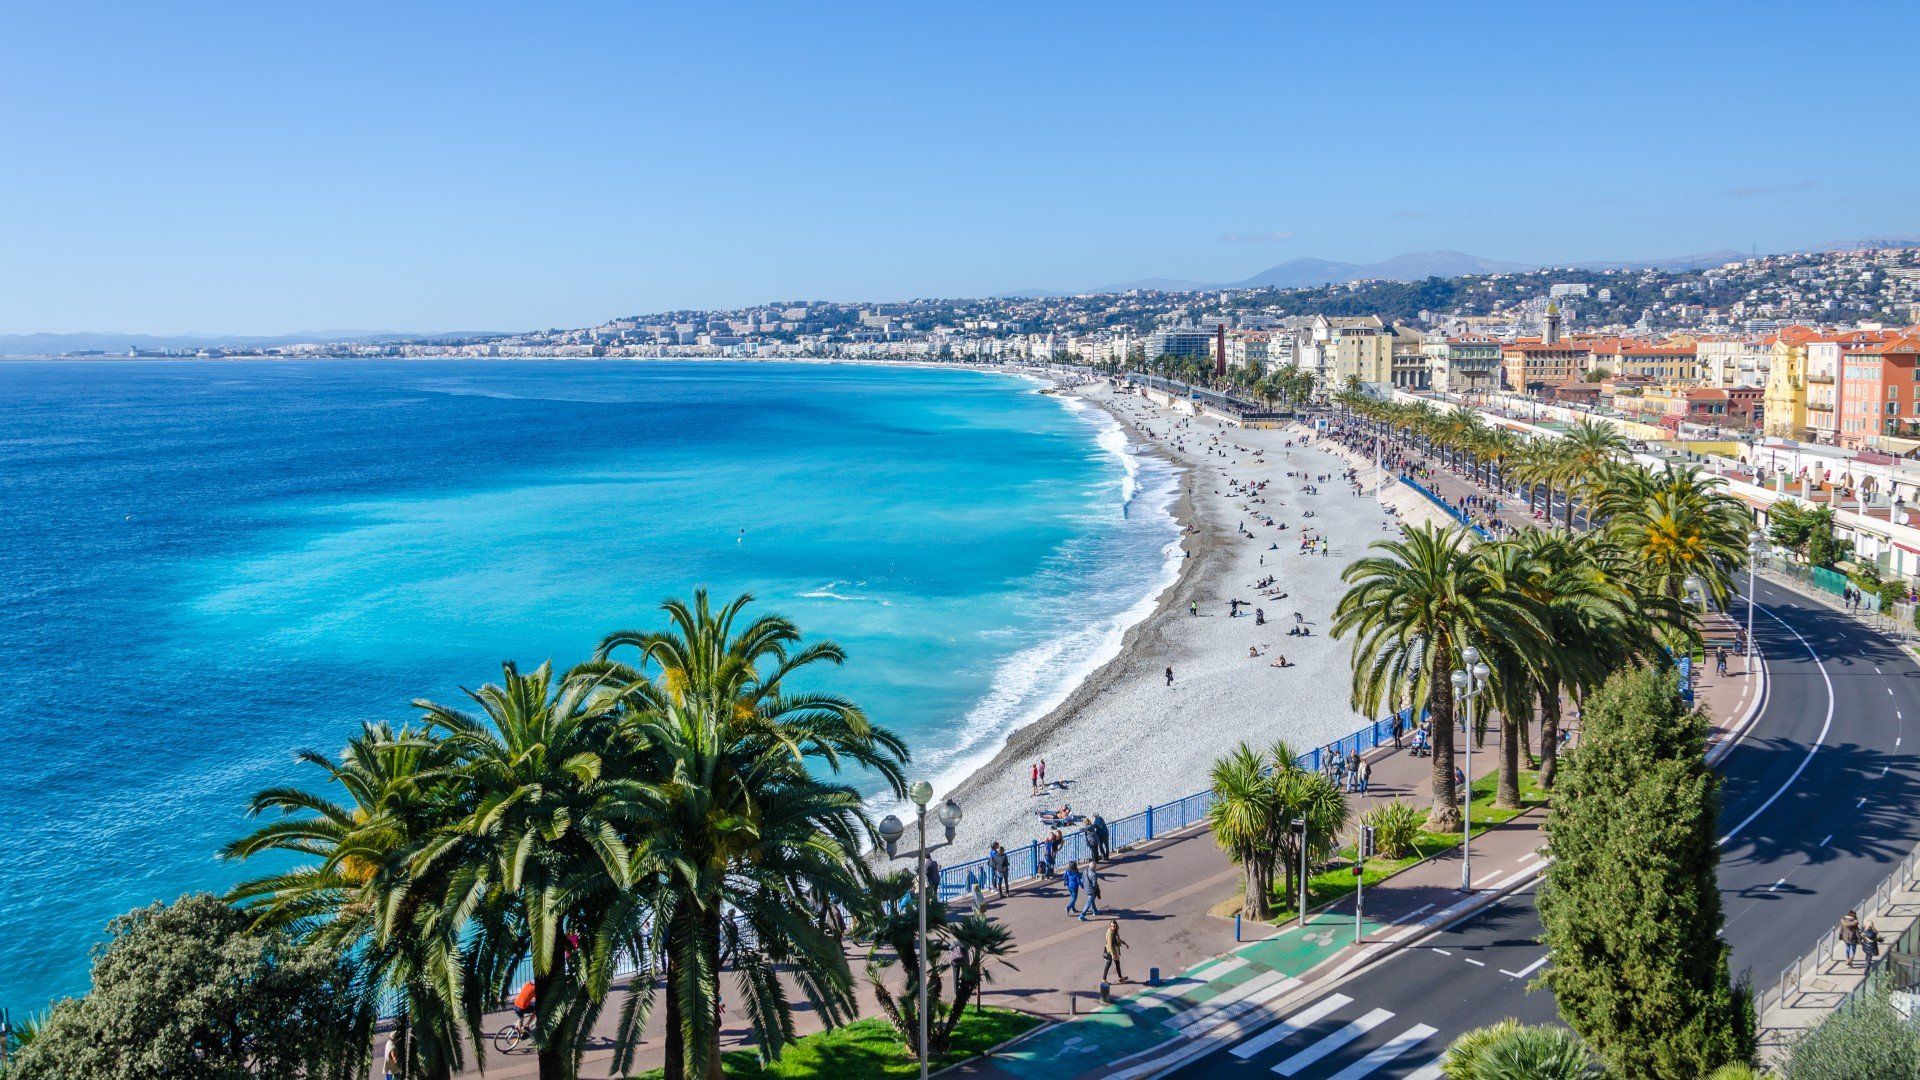 Make the most of the magnificent stretches of sand and turquoise waters of Nice's Bay of Angels 